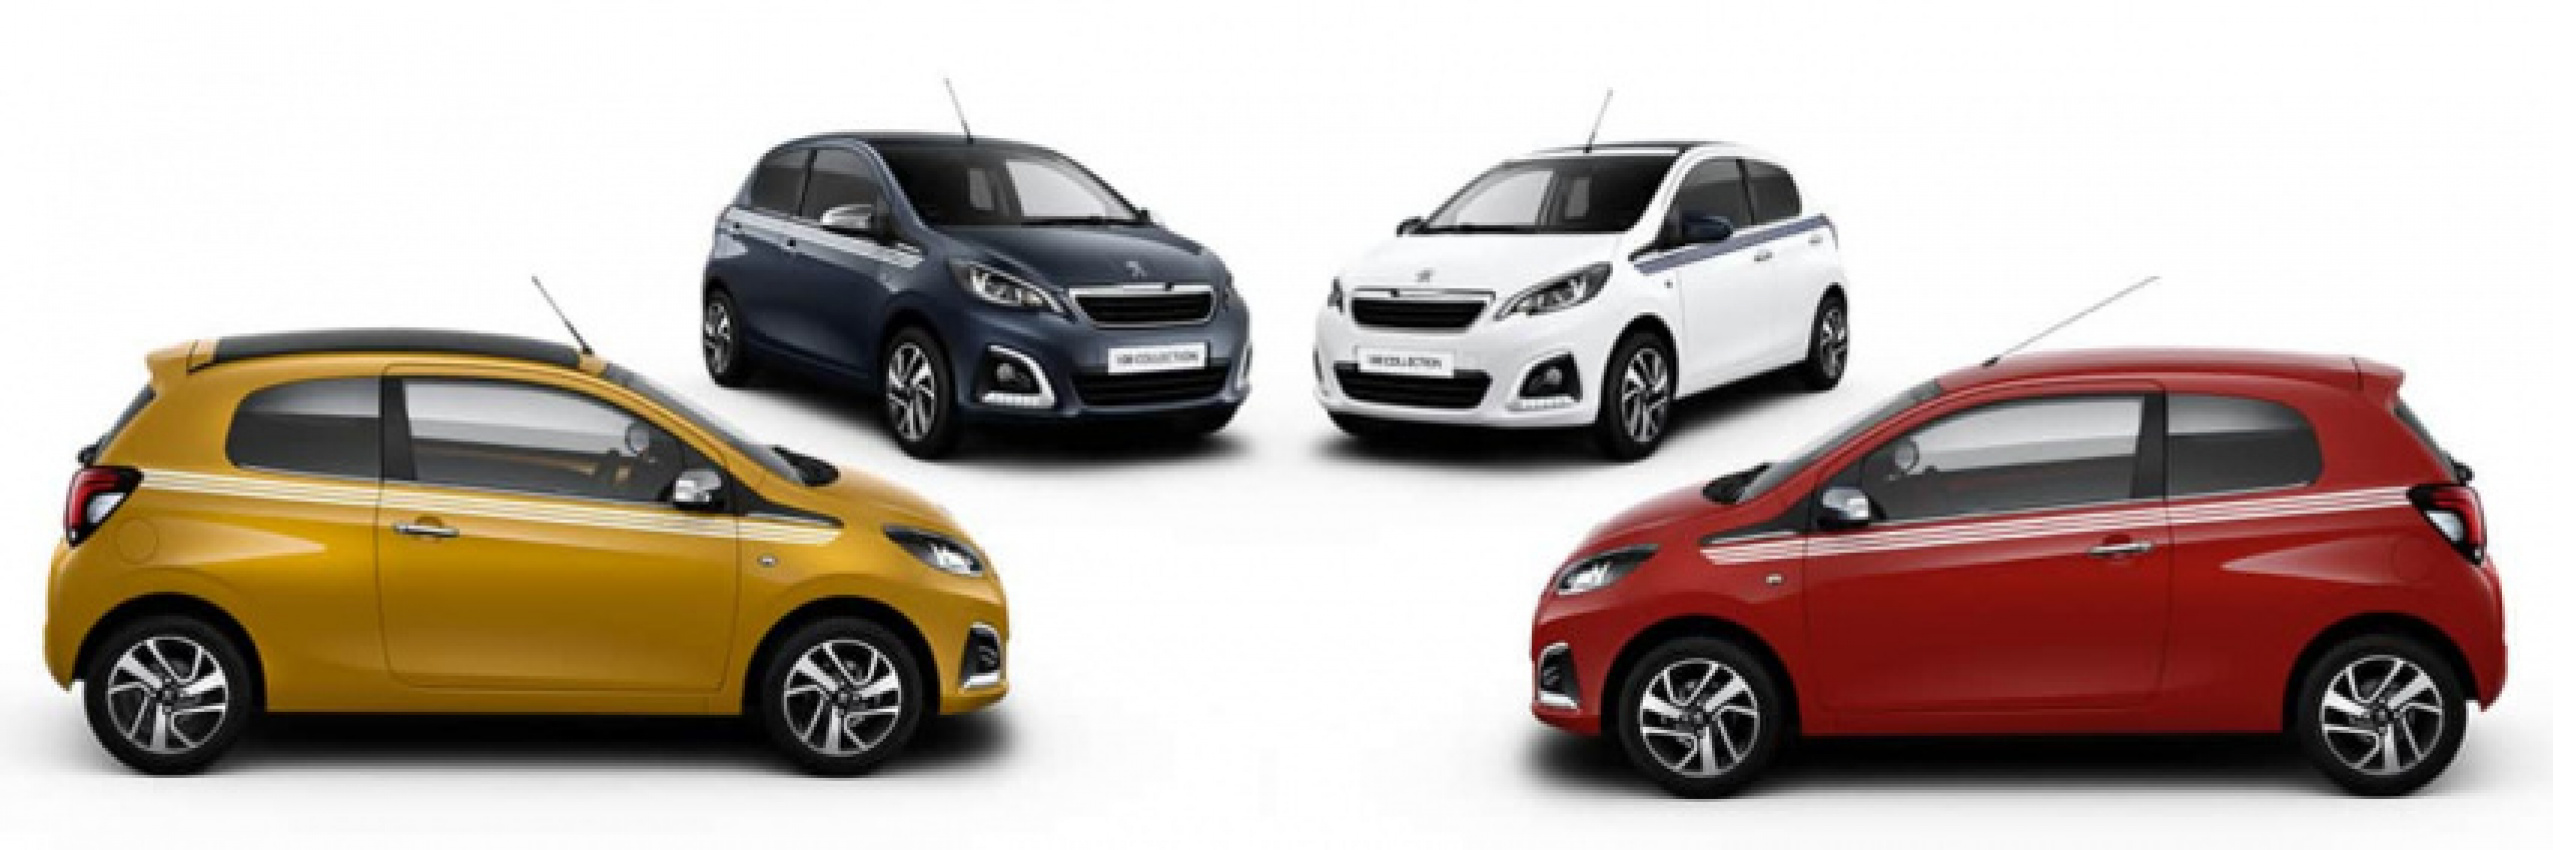 autos, cars, geo, peugeot, peugeot 108 gets new trims and finance offers